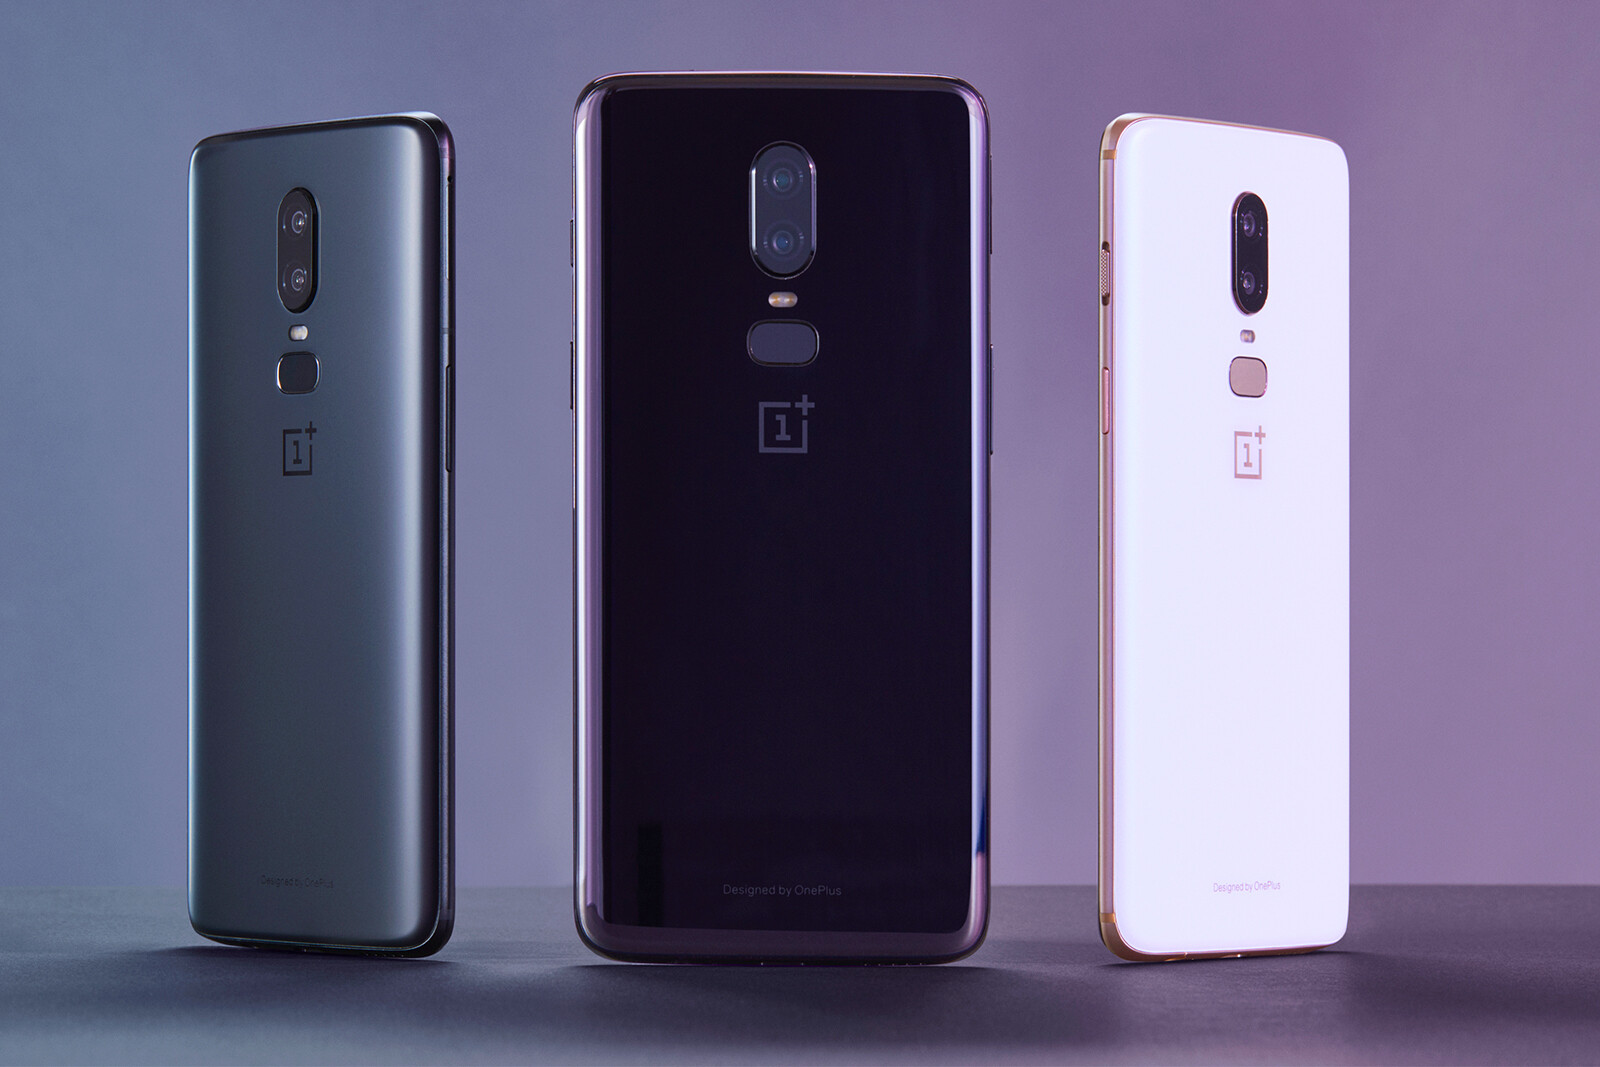 OnePlus 6: An older OnePlus model worth considering in Israel